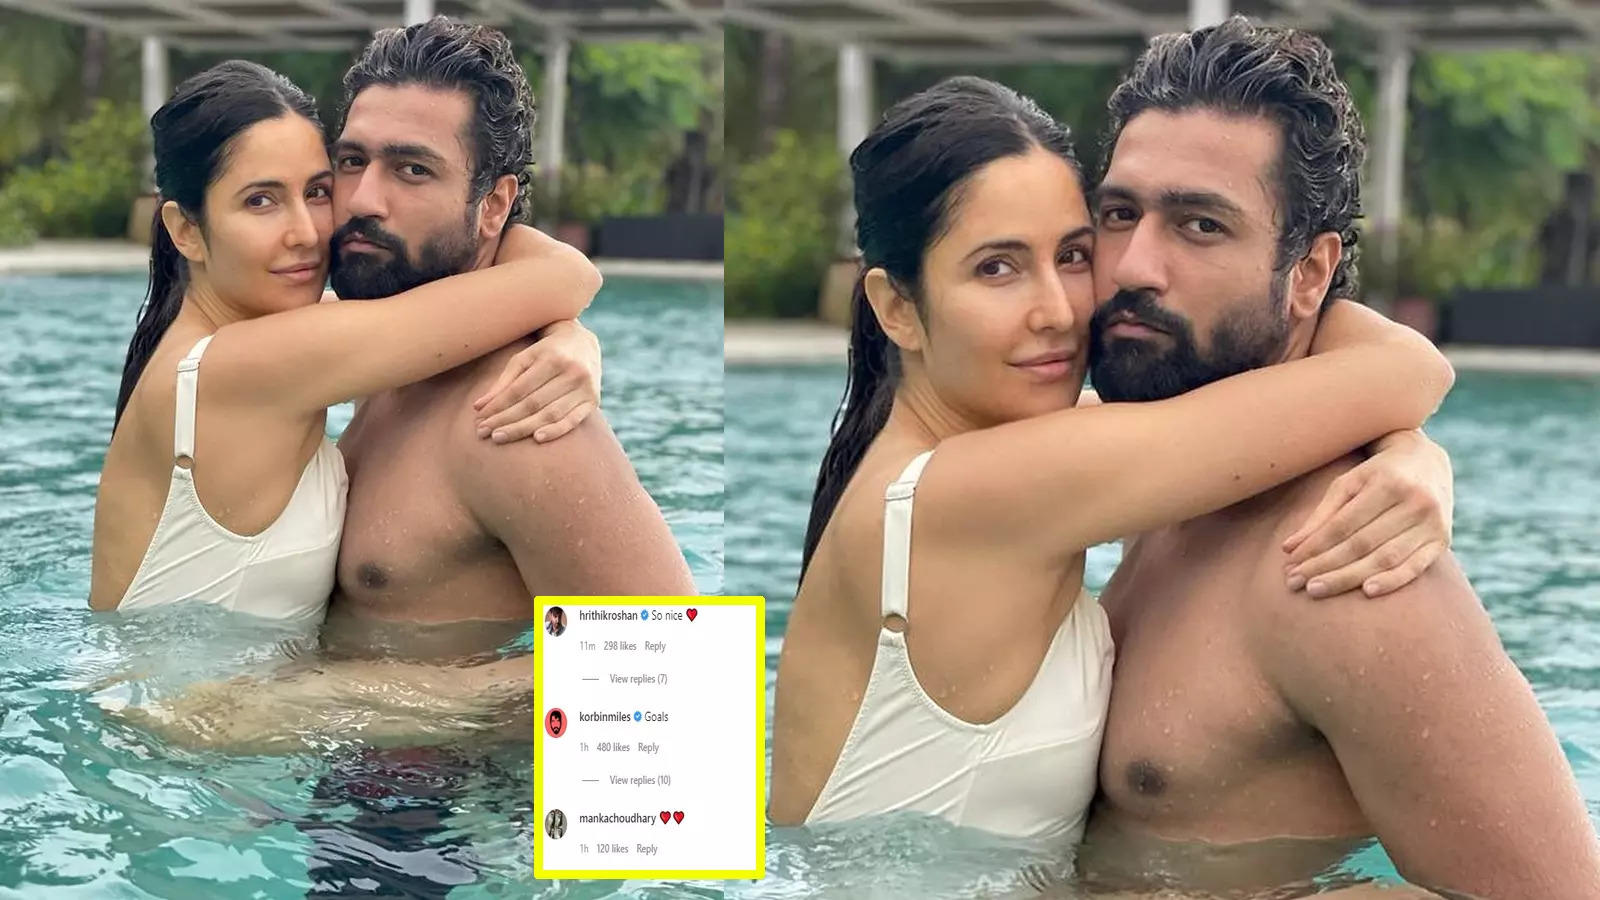 Katrina Kaif plays the possessive wife in steamy new pool pic with Vicky Kaushal Hindi Movie News photo